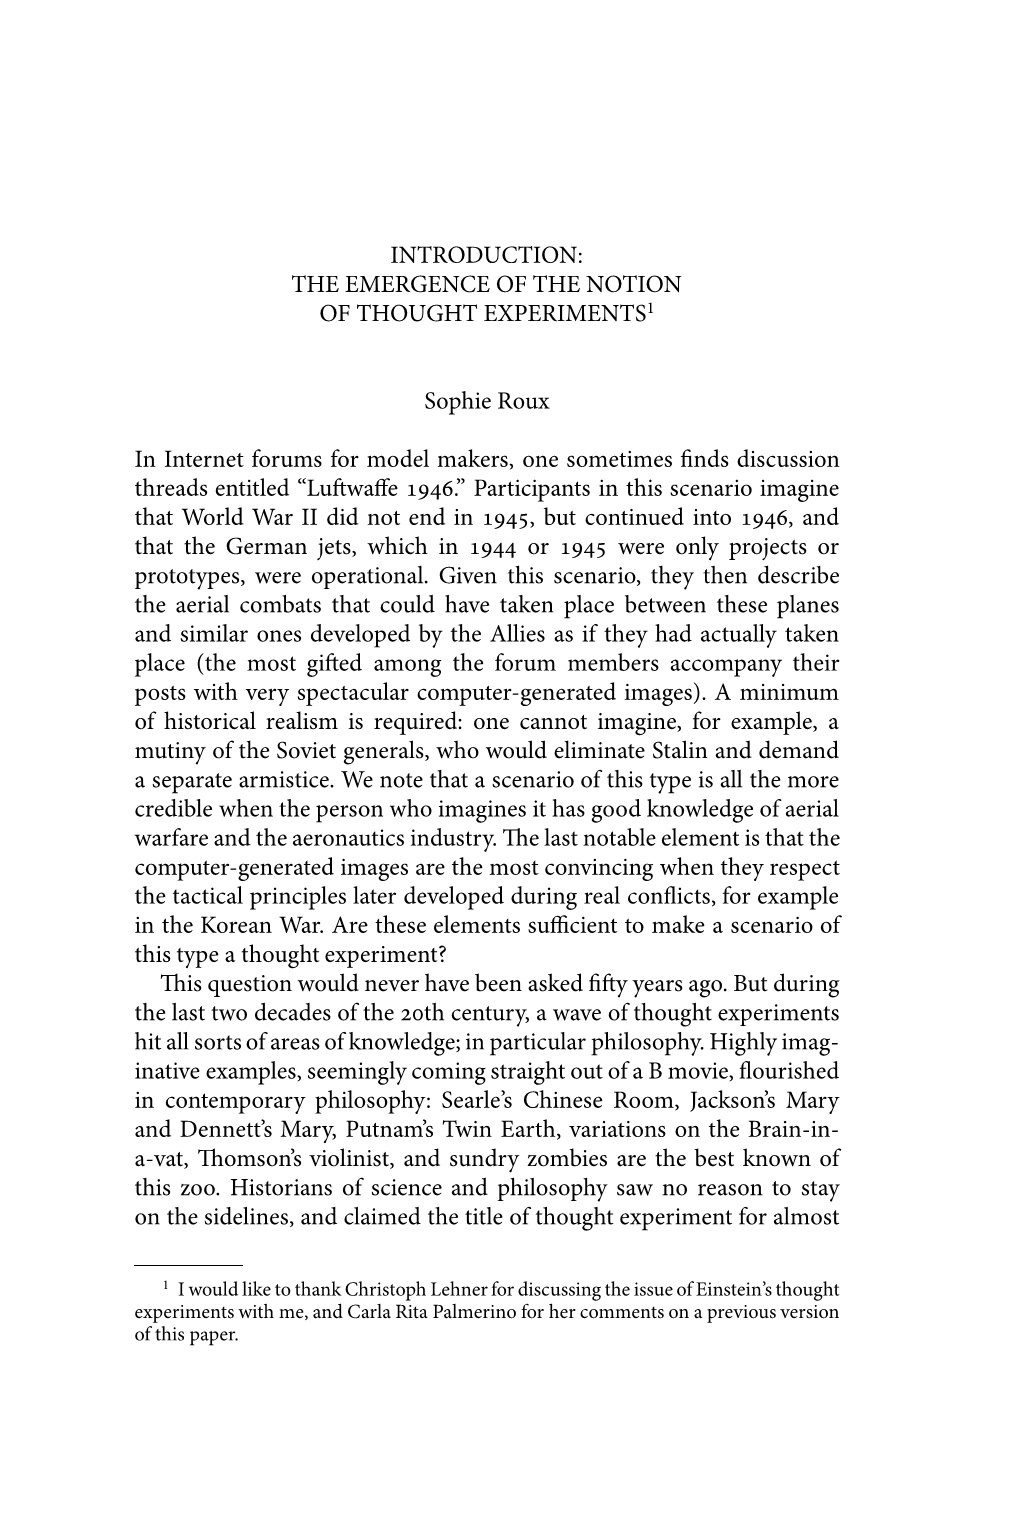 The Emergence of the Notion of Thought Experiments1